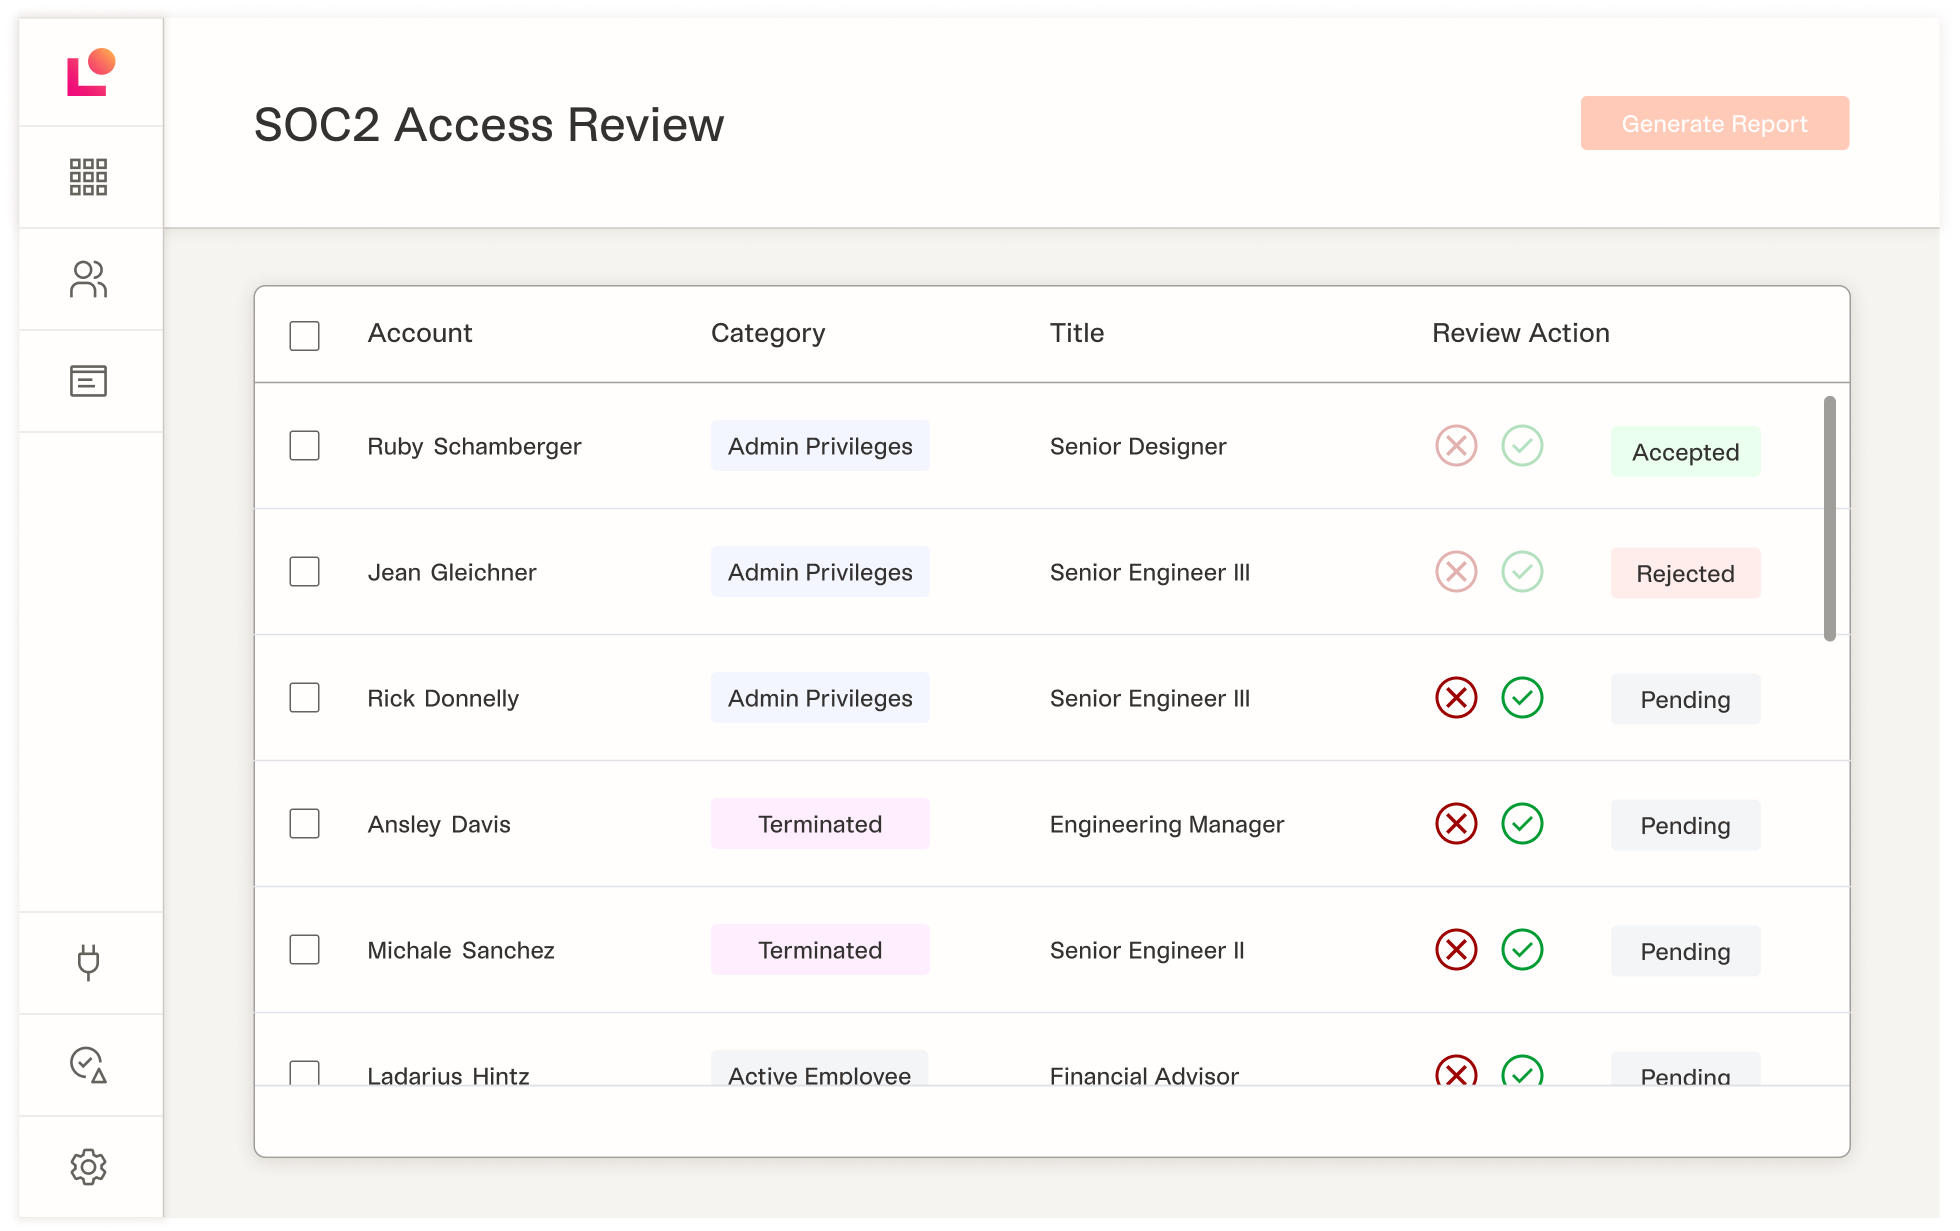 Gather all the app access evidence you need for SOC2 audits. Keep track of every employee who requests, gets approval for, and uses every app across your enterprise.